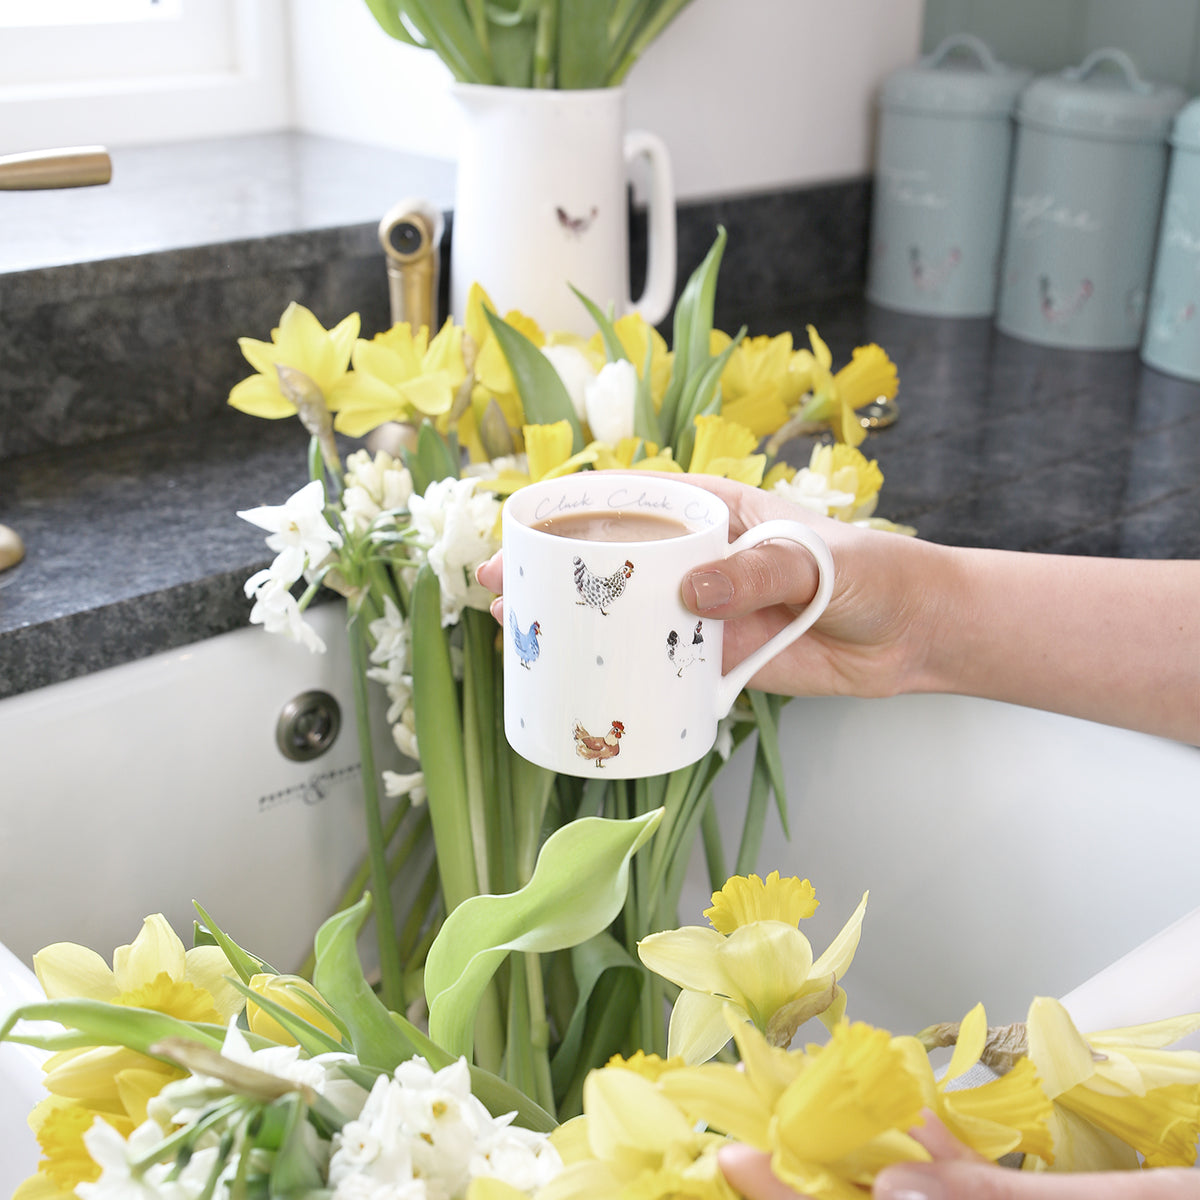 Cluck Cluck Cluck Mug with spring flowers and daffodils